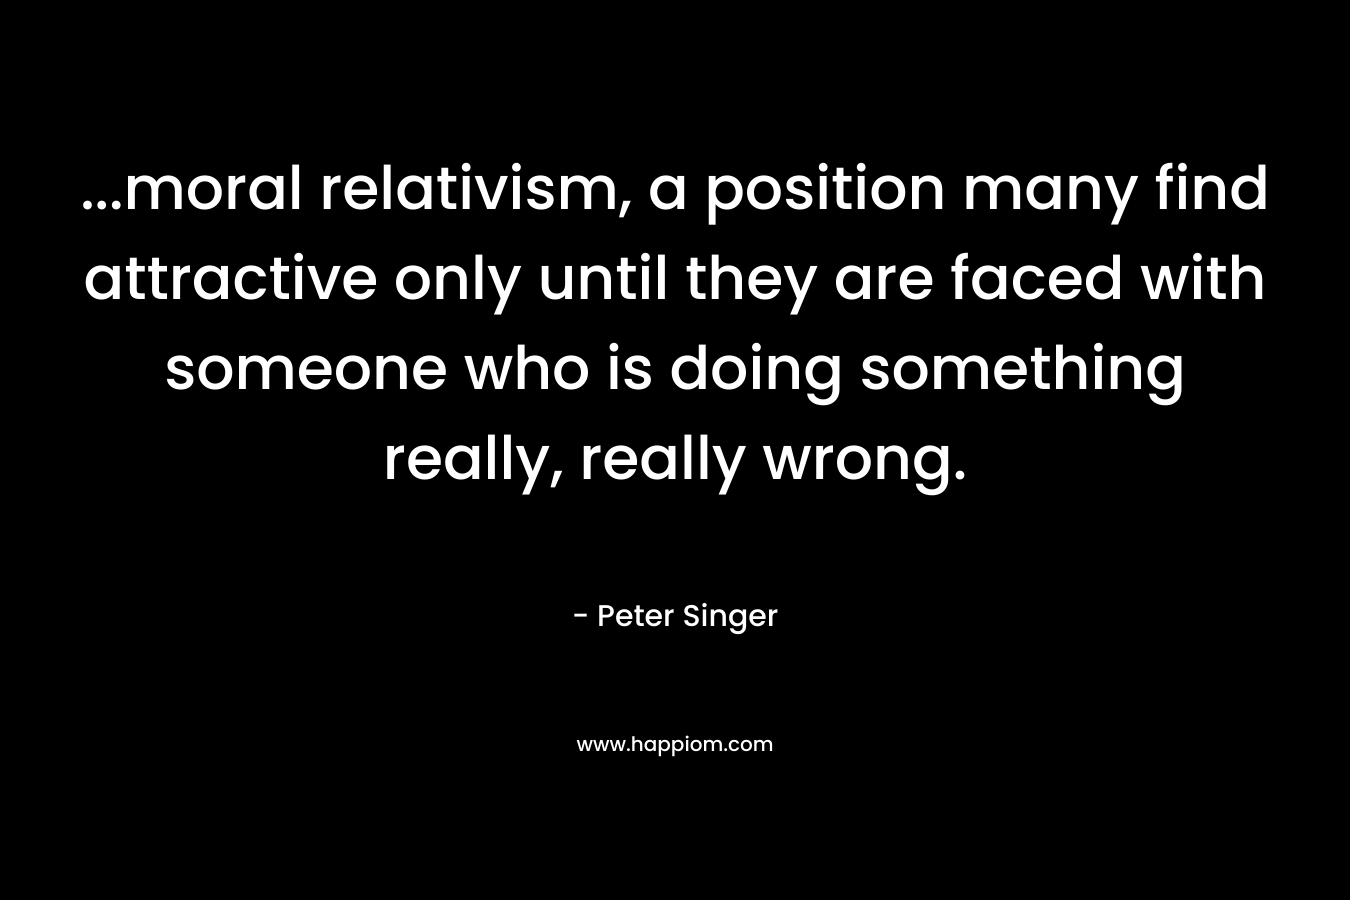 …moral relativism, a position many find attractive only until they are faced with someone who is doing something really, really wrong. – Peter Singer